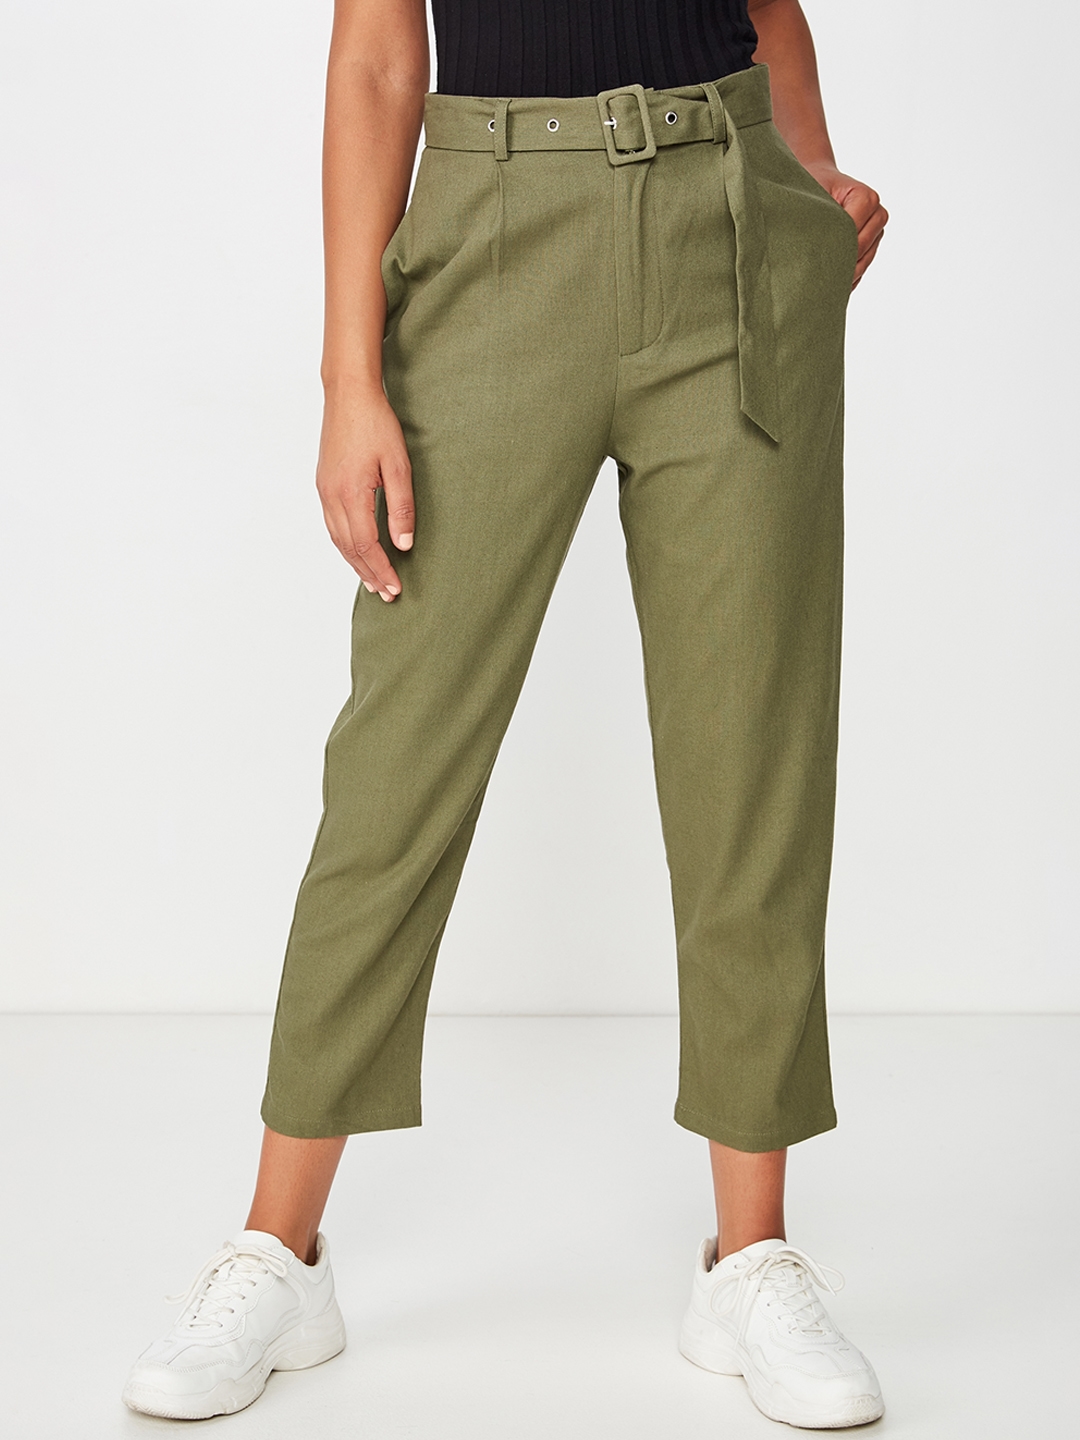 Olive Green Color Cotton Trousers For Men  Rawba